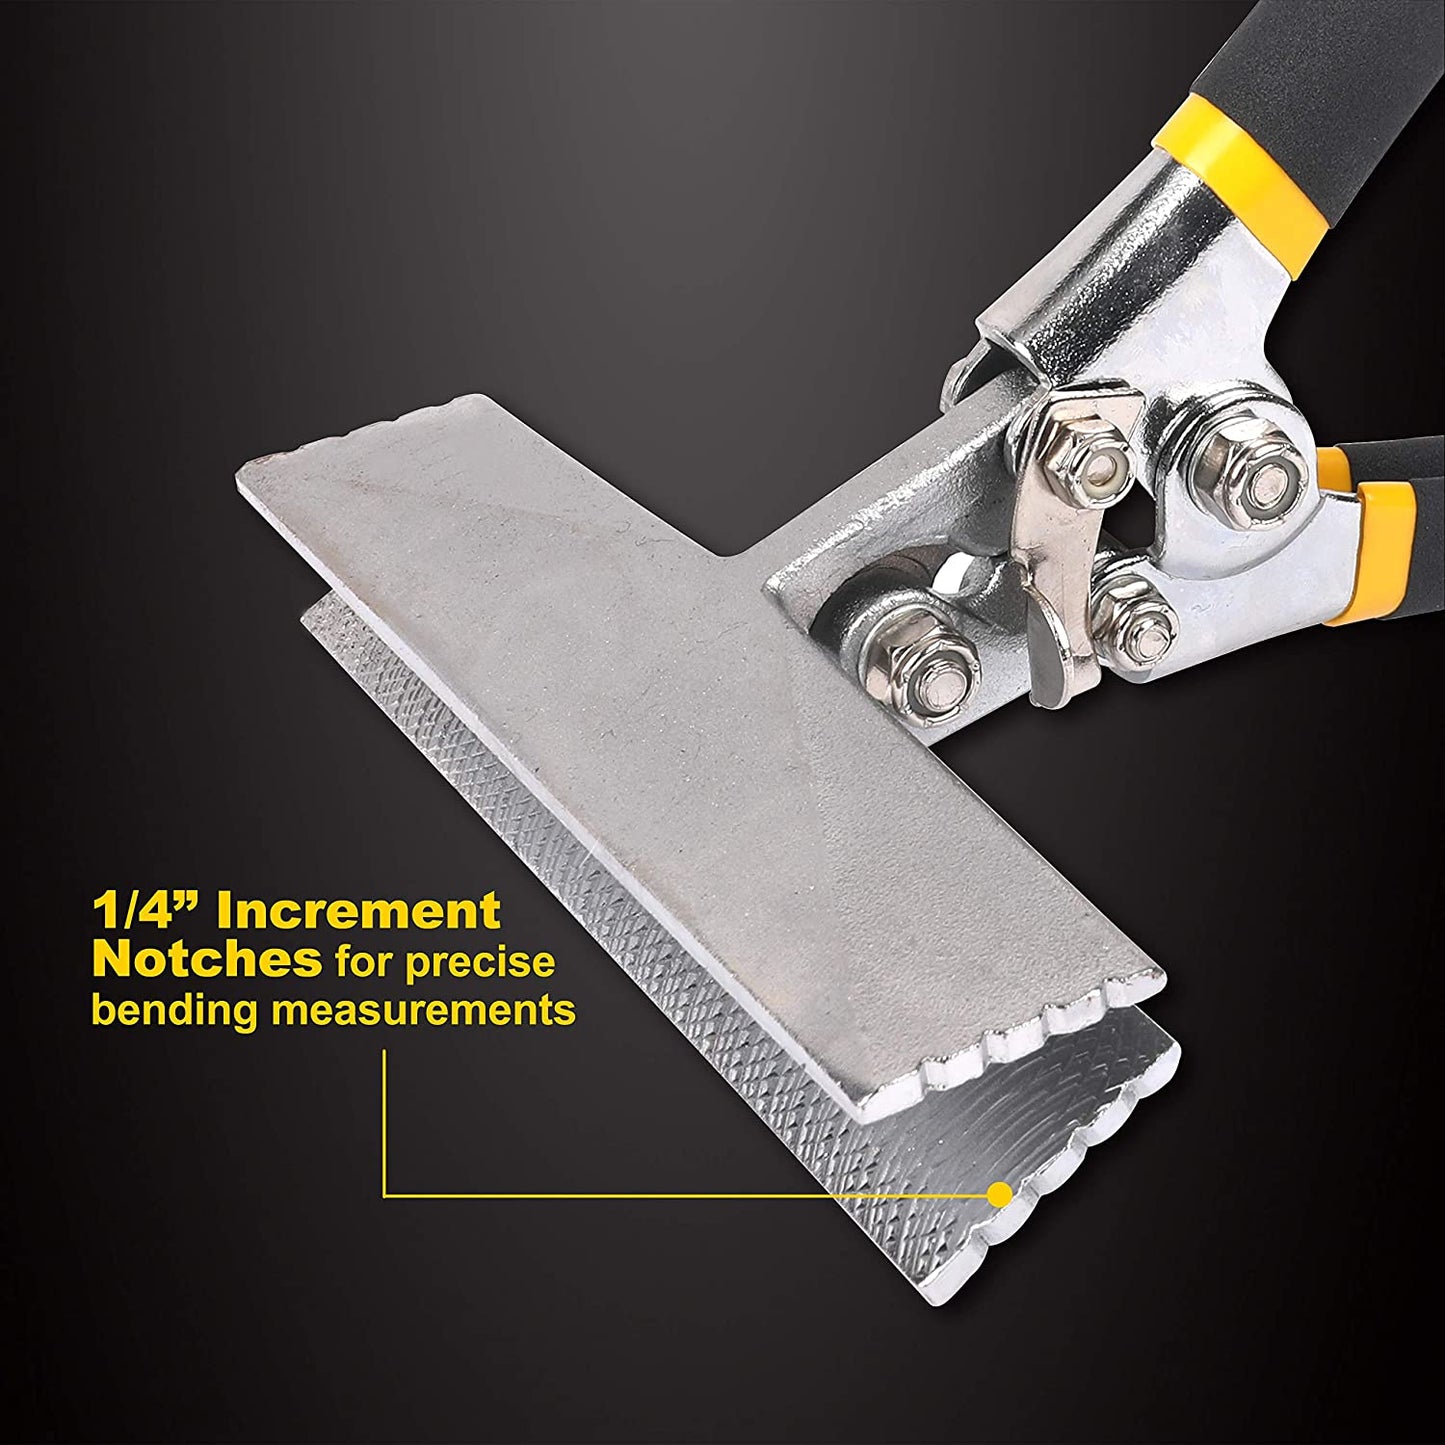 A close-up view of a Perma Cover High Quality Sheet Metal Hand Seamers - Multiple Sizes Available with black and yellow handles. The heavy-duty all-steel tool features a notched metal bar marked with "1/4" Increment Notches for precise bending measurements" in yellow text, highlighting the evenly spaced notches for precision. Ideal for sheet metal hand seamers.